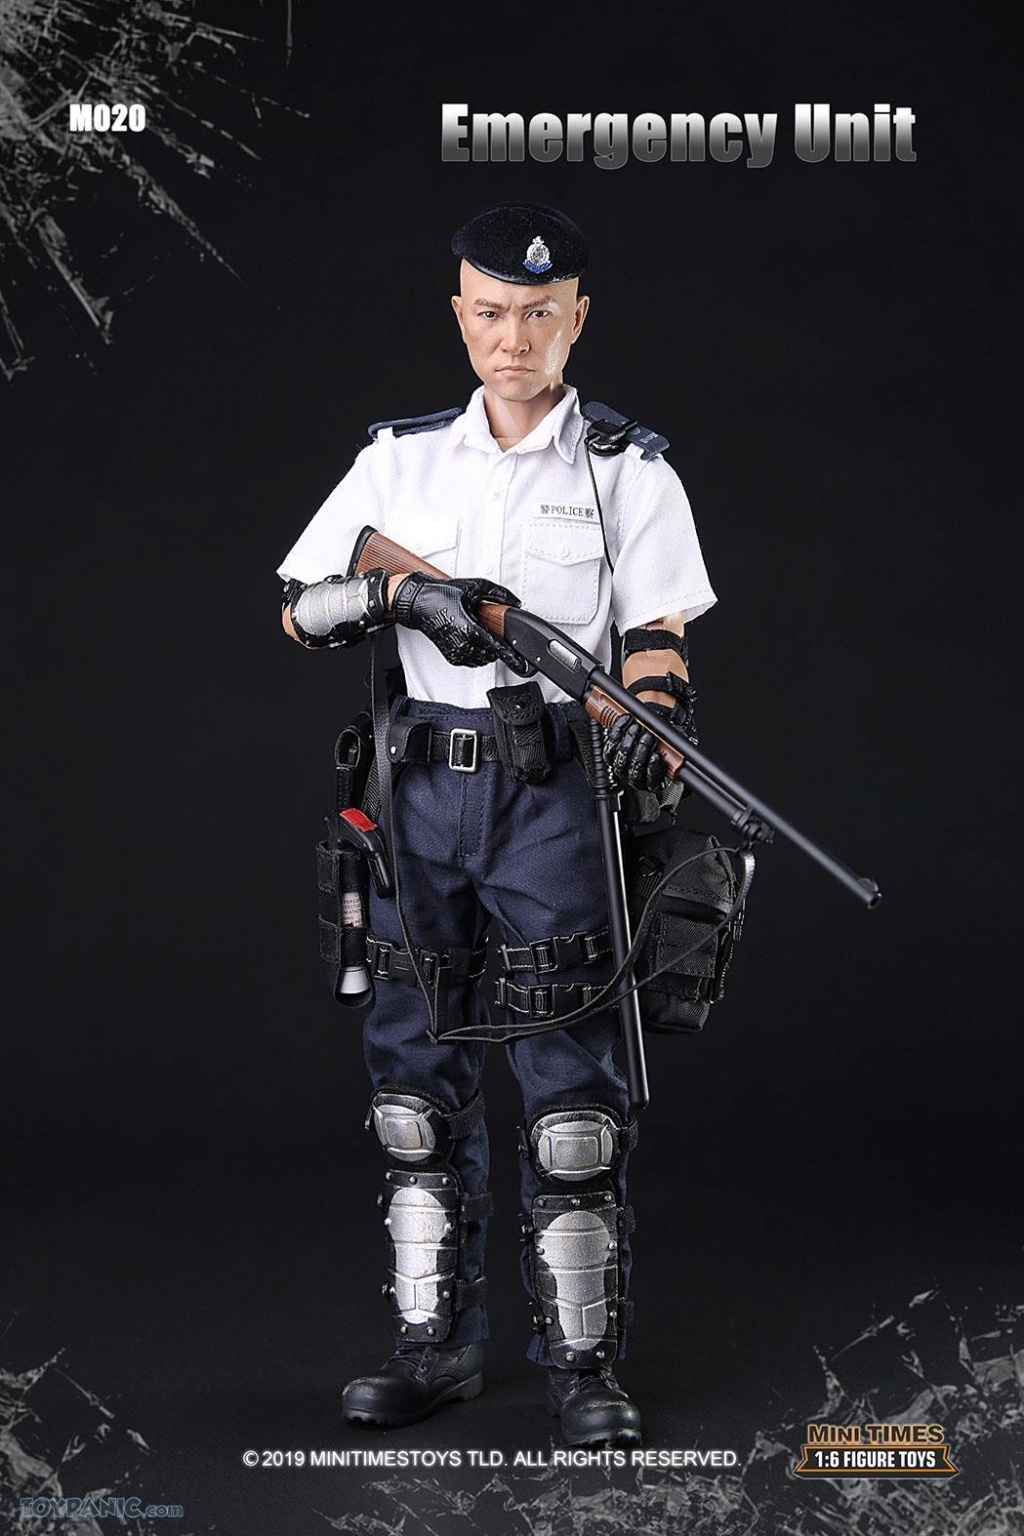 NEW PRODUCT: 1/6 scale Hong Kong Police Action Figure From Mini Times Toys Code: MT-M020 10302028